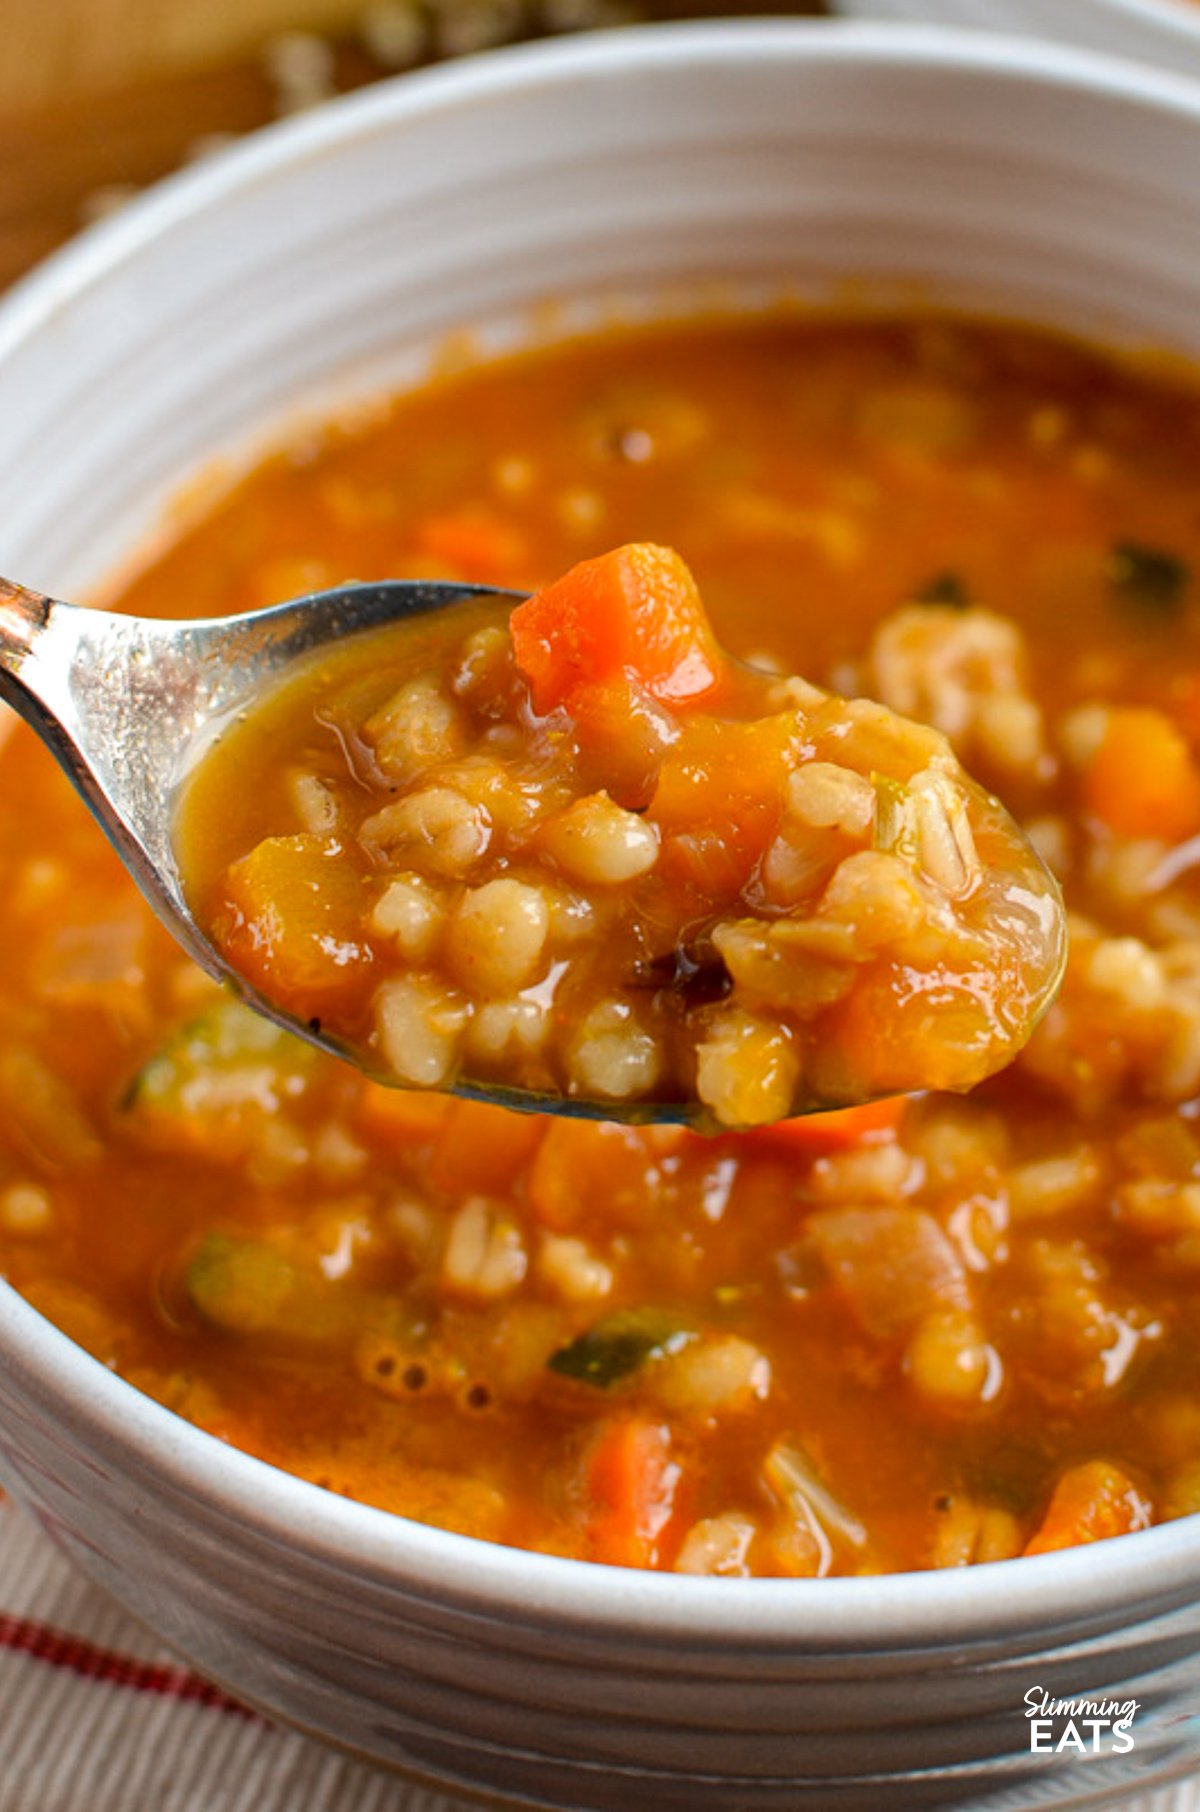 Vegetable Pearl Barley Soup in a white bowl, with a silver spoon scooping up some soup, showcasing the soup's hearty ingredients and texture.